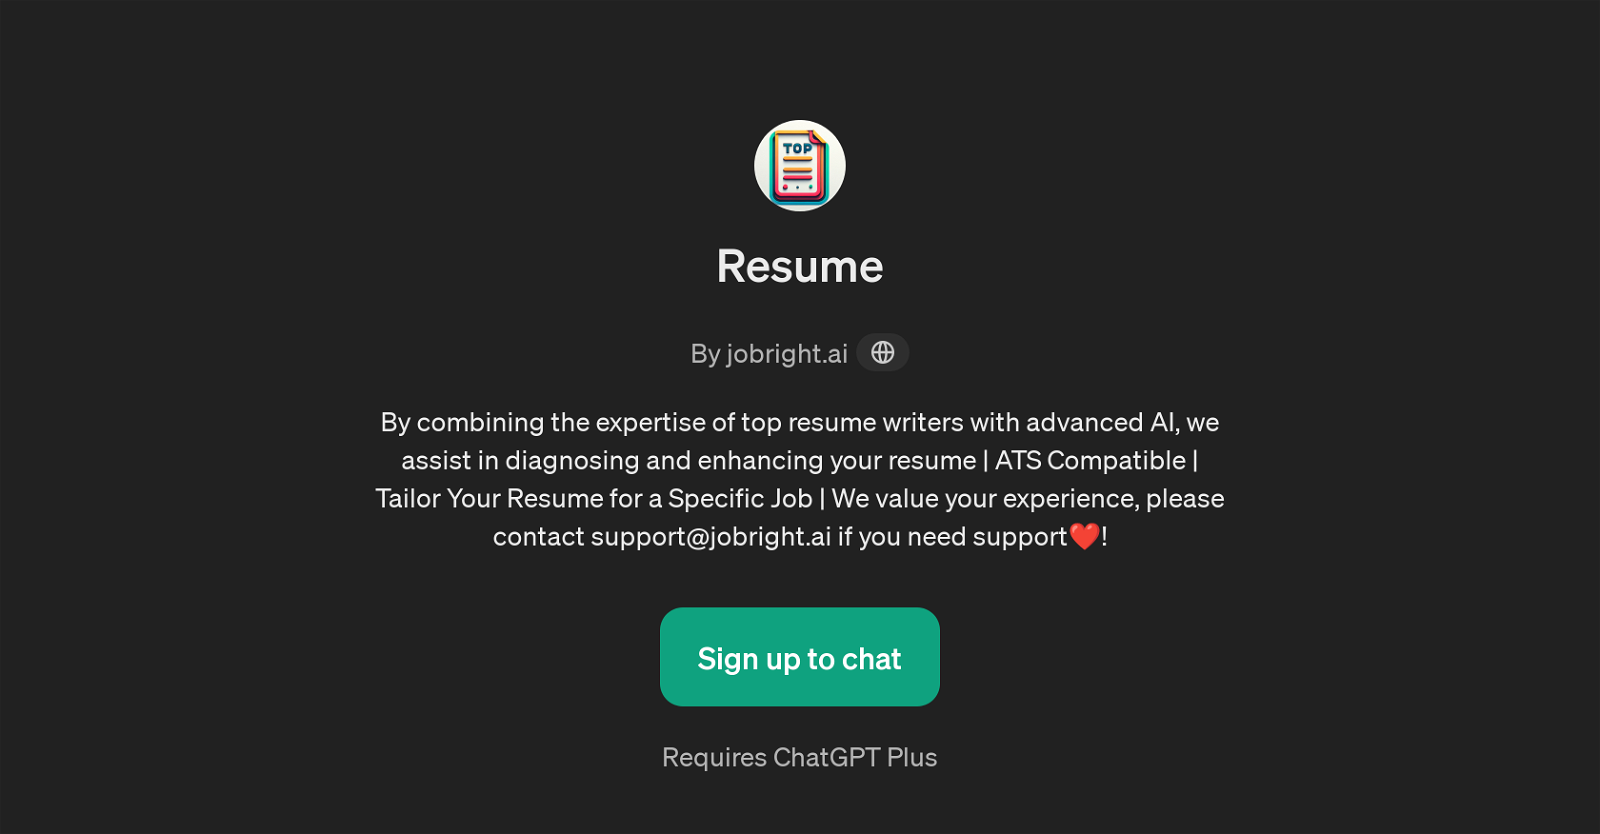 Resume by jobright.ai website